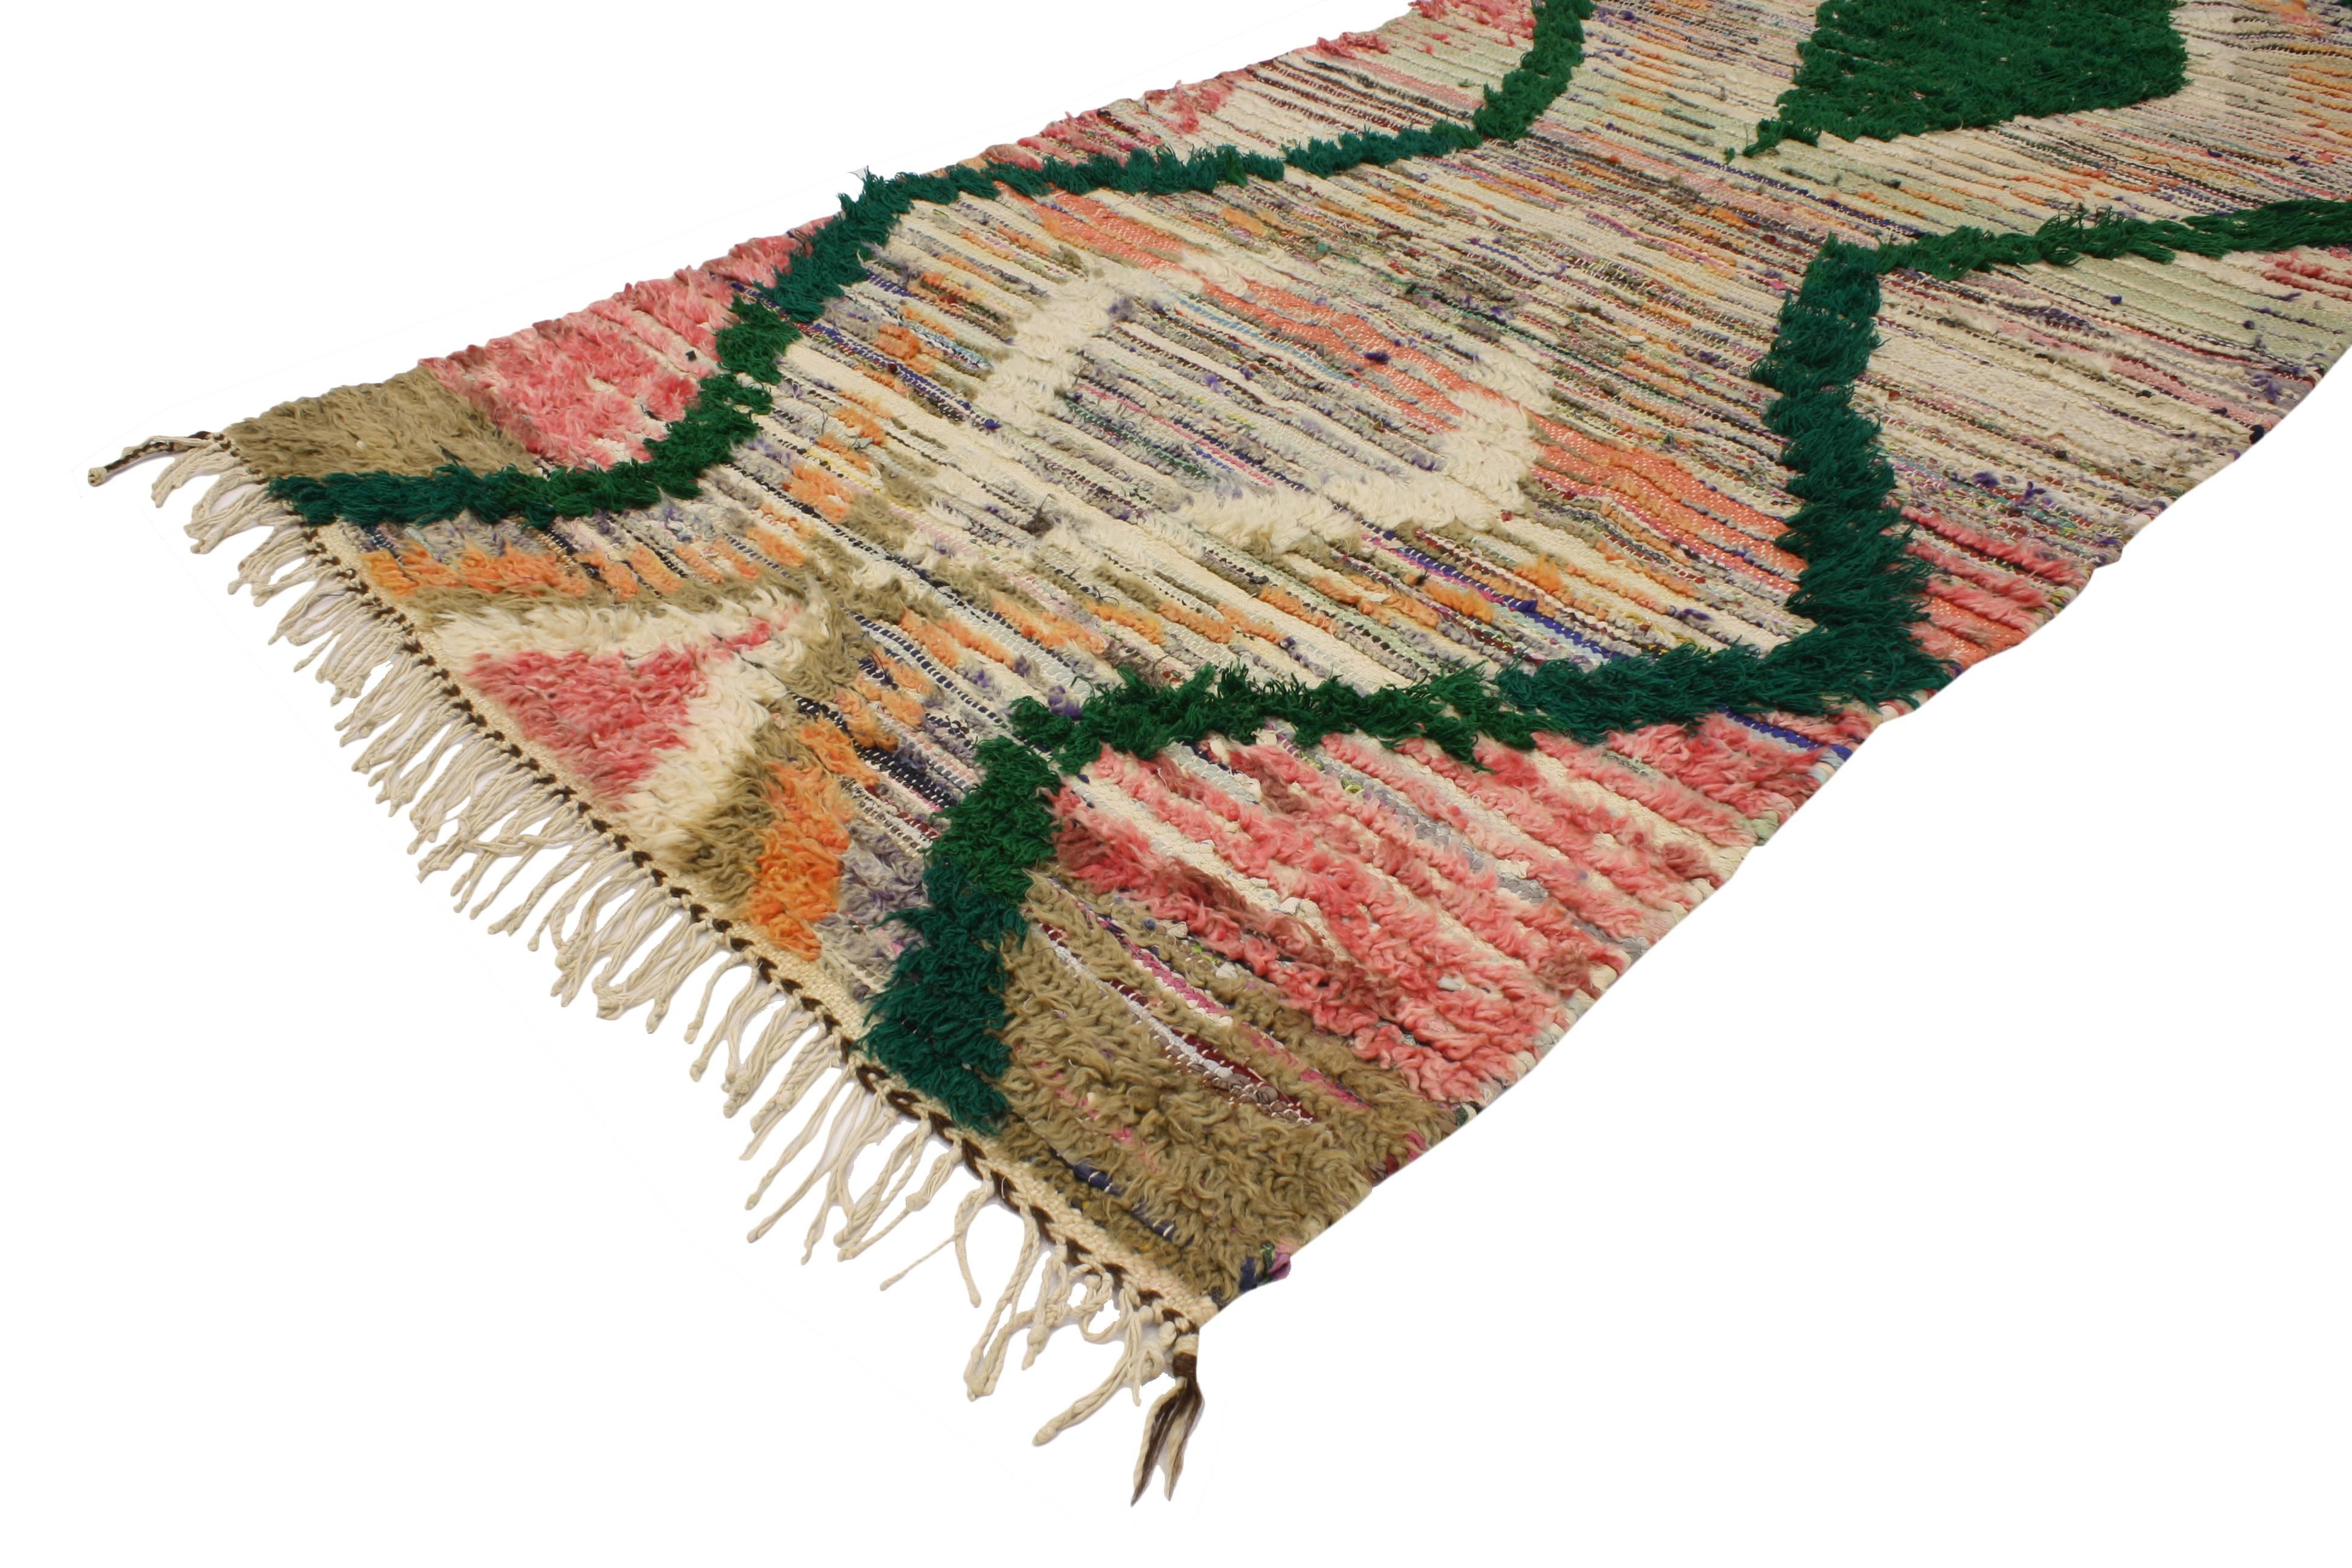 This boho chic vintage Berber Moroccan runner features a tribal design. Highlighting a row of stacked diamonds surrounded by a green zigzag vertical border. The outer zigzag lines referred to as snakes symbolize male potency. The stacked diamond